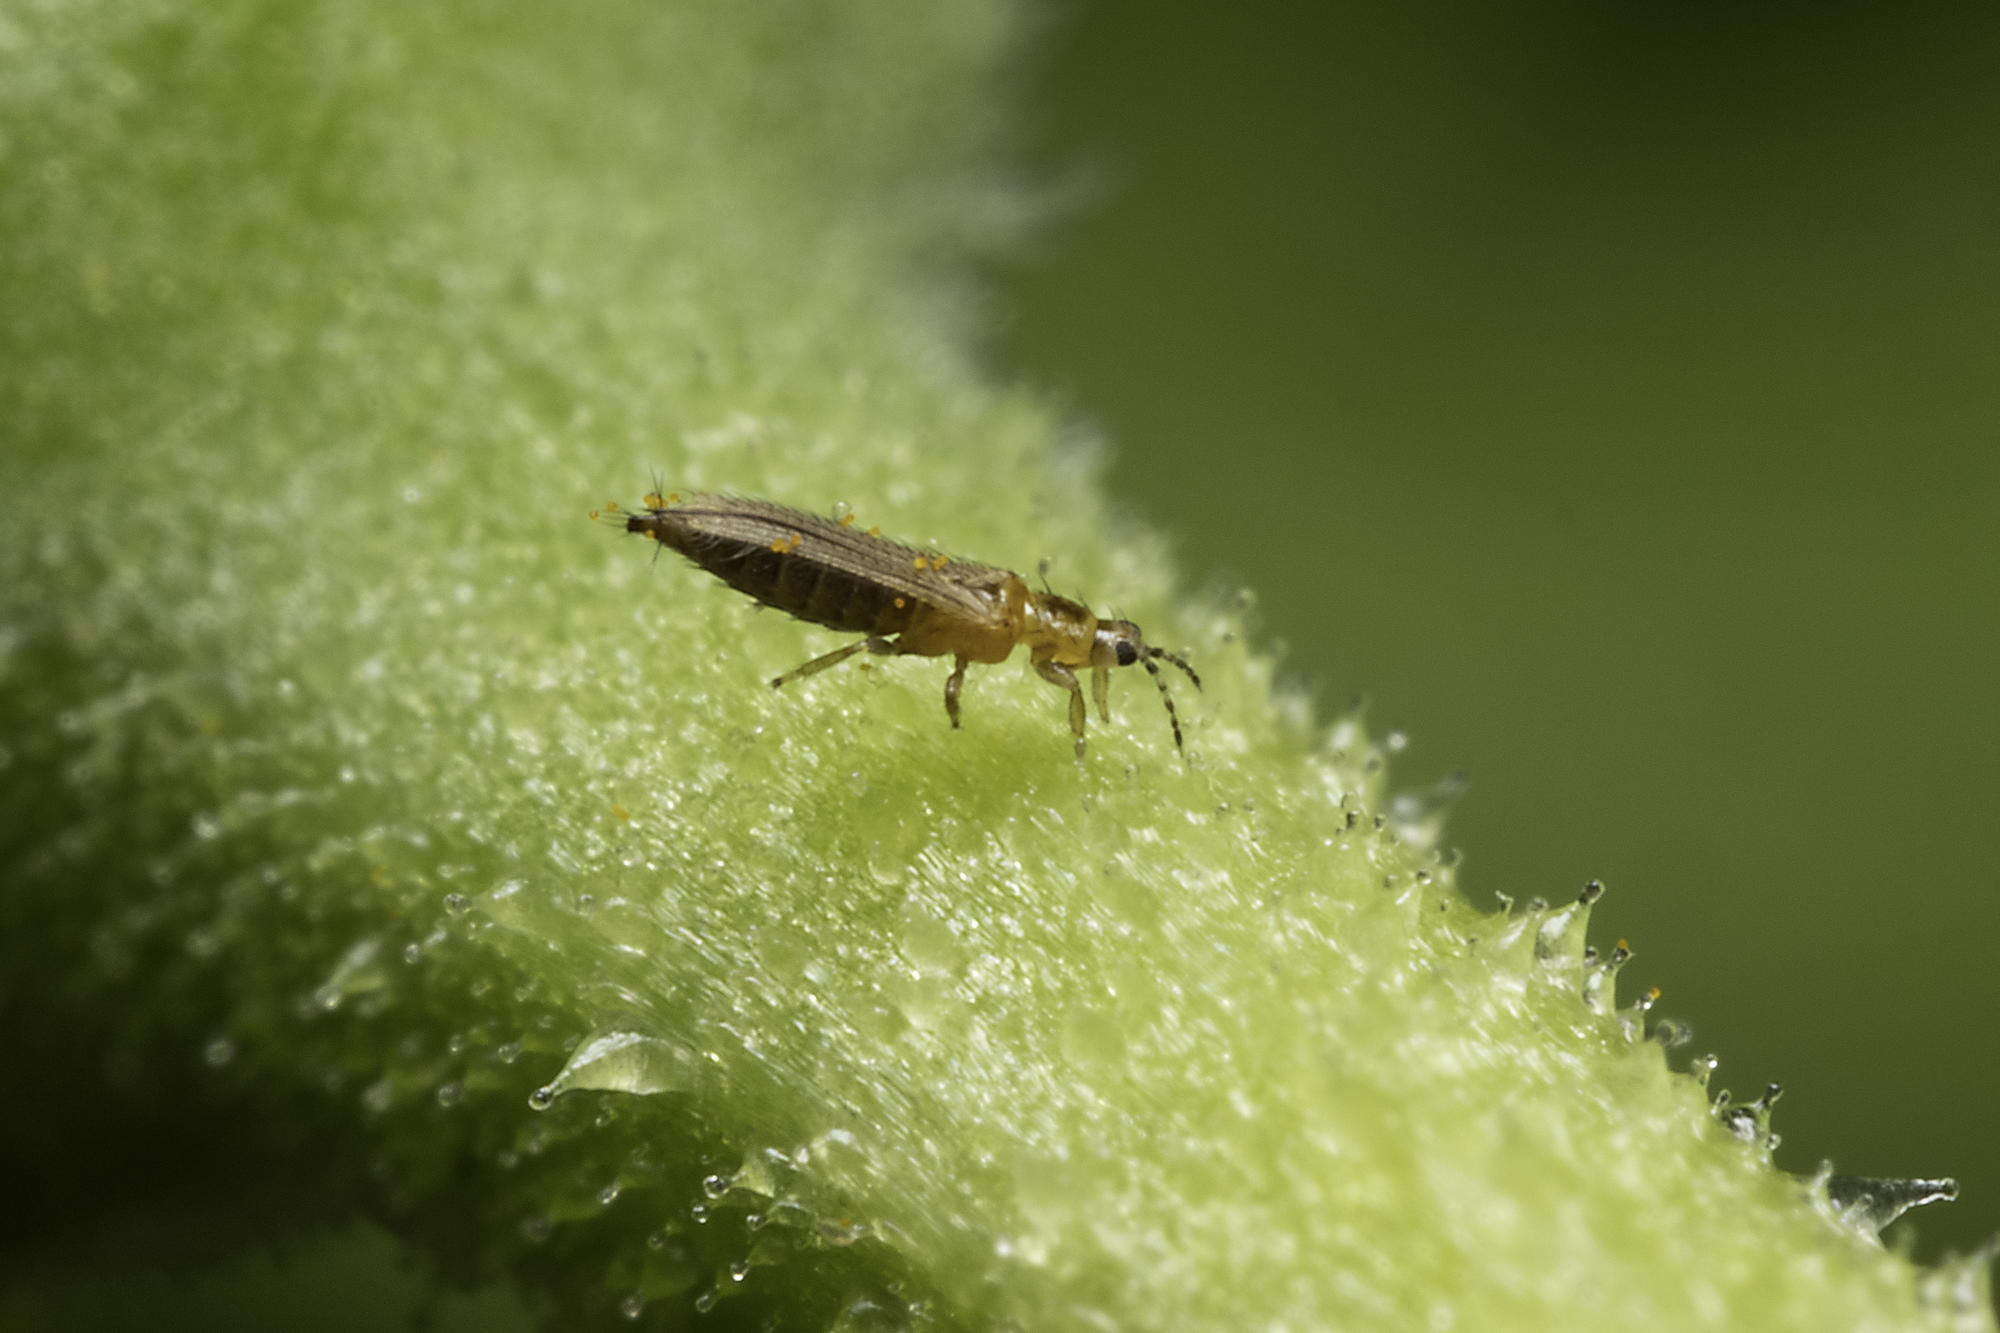 thrips tiny insect on magnified plant stem